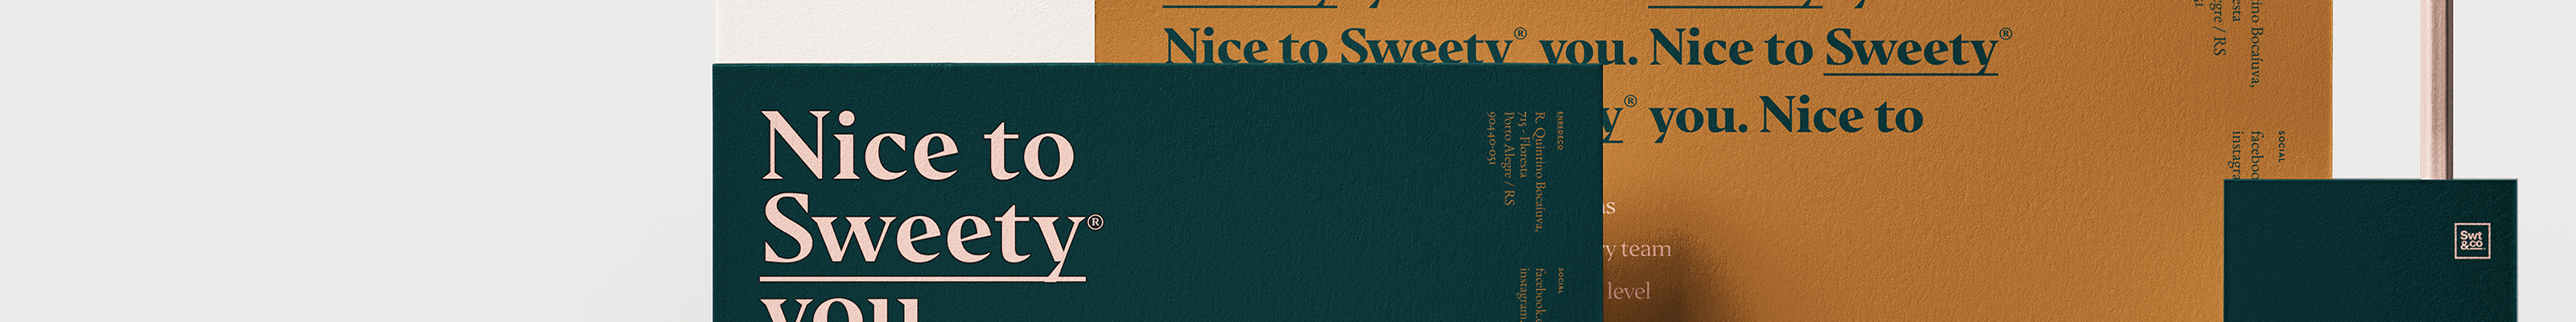 Sweety & Co.'s profile banner